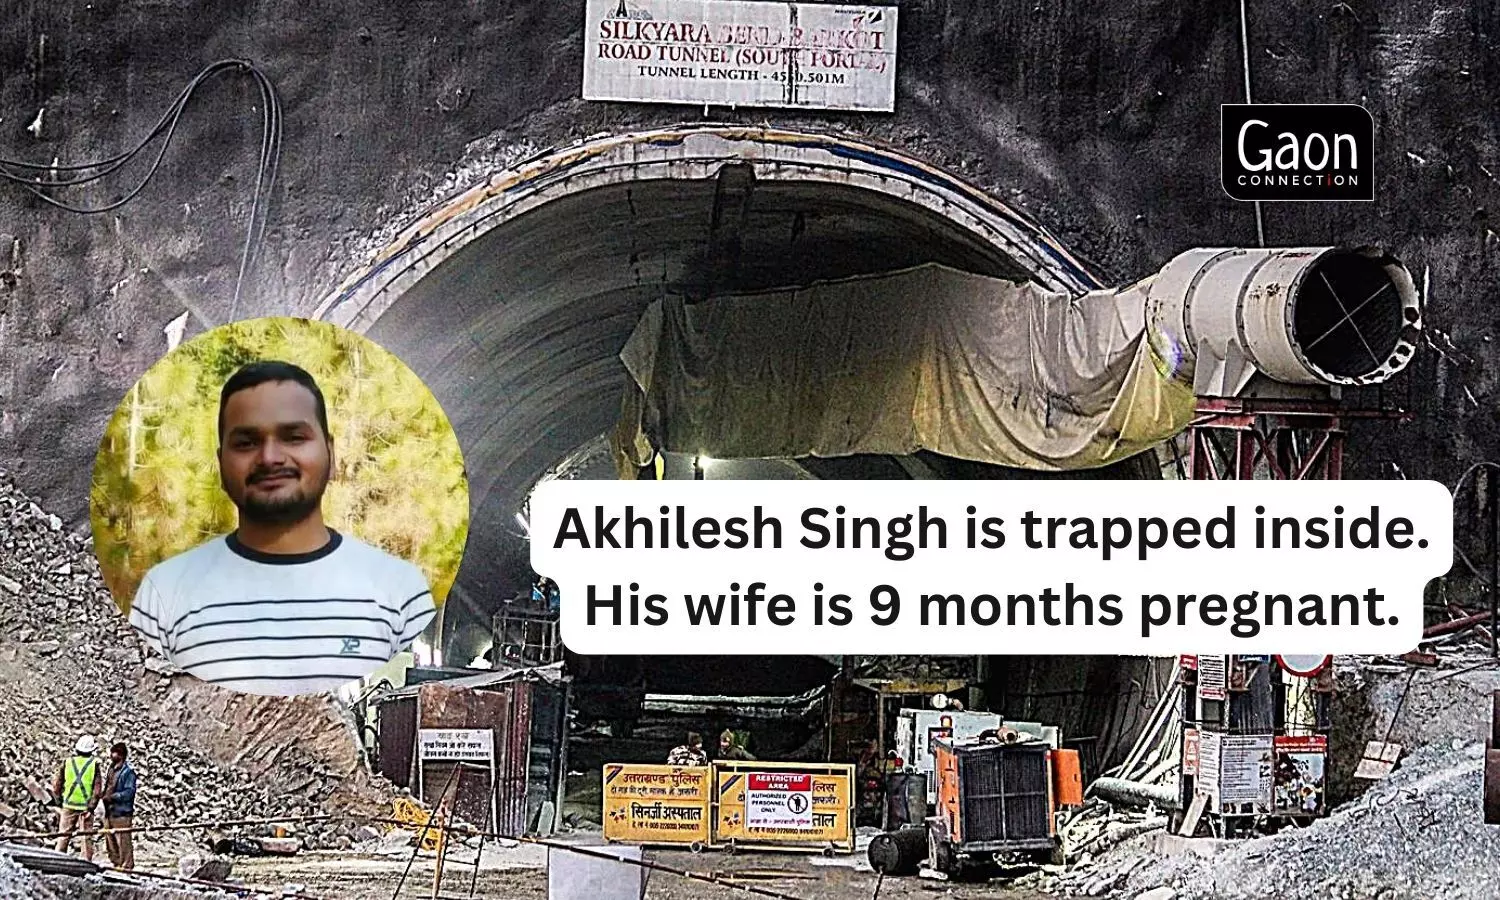 Uttarakhand Tunnel Rescue: One of the Trapped Worker’s Pregnant Wife is Expected to Deliver in a Week’s Time